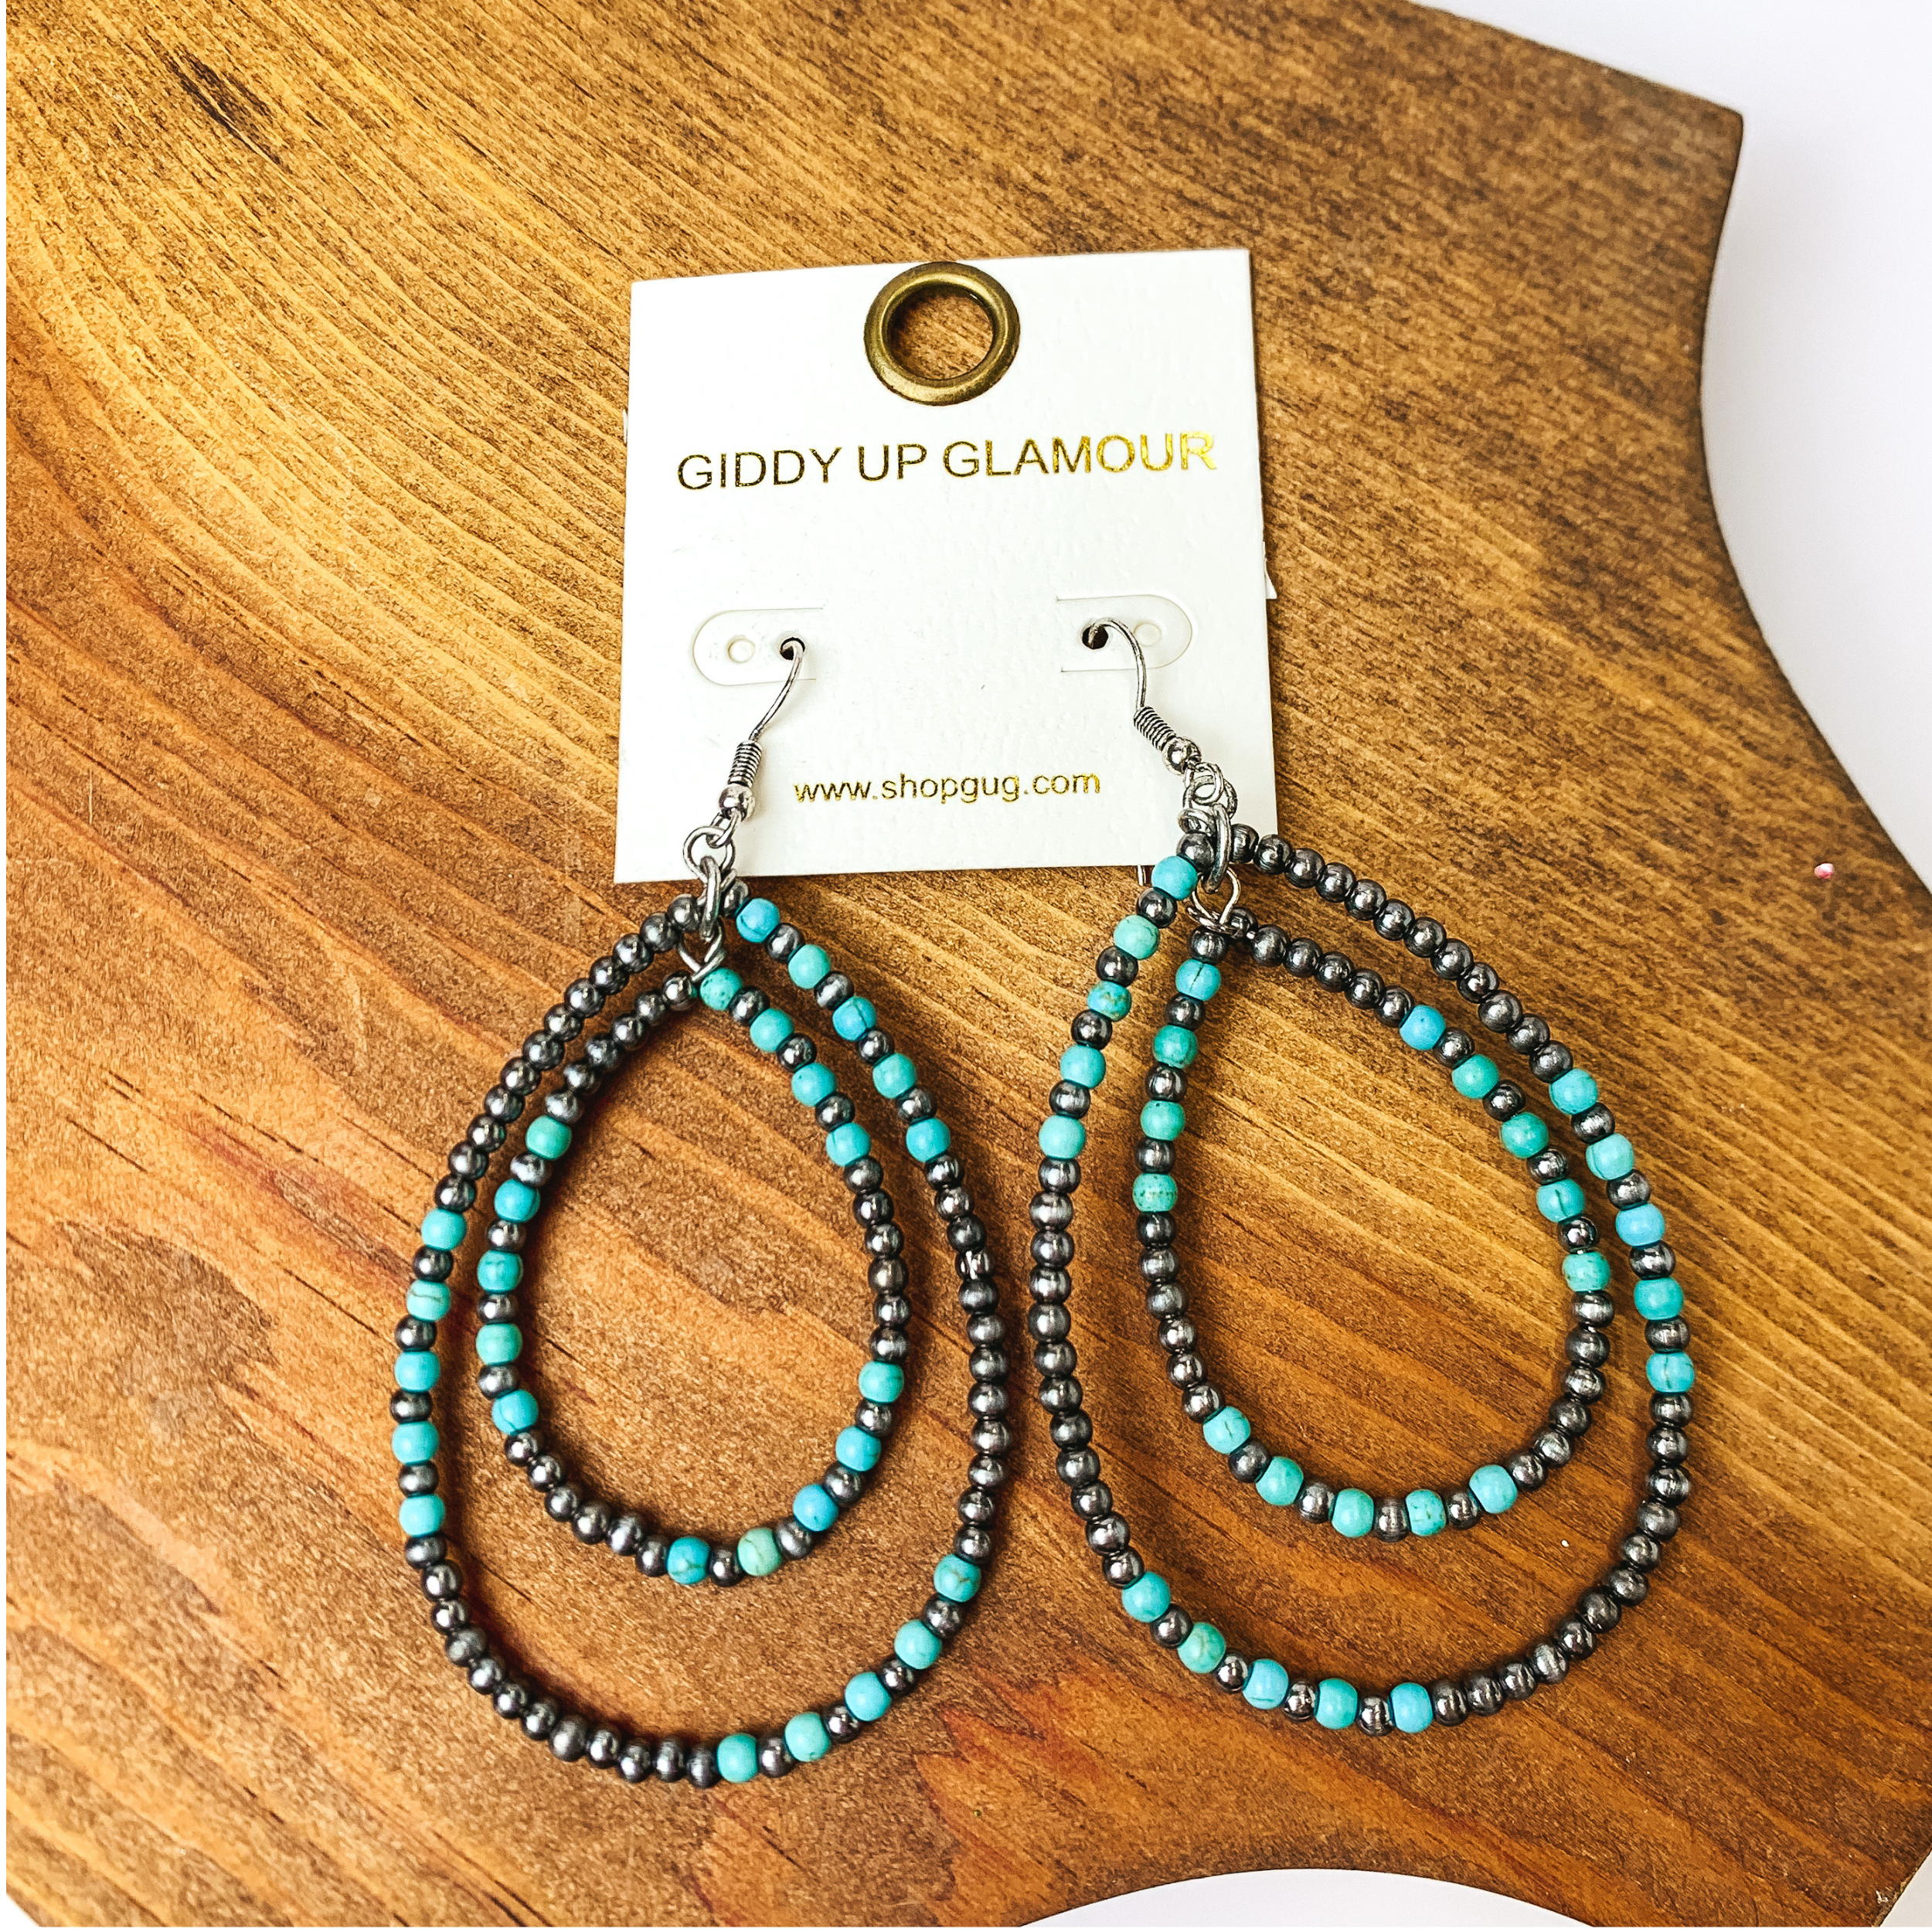 Beaded Open Double Drop Earrings in Silver Tone and Turquoise. Pictured on a wood piece.